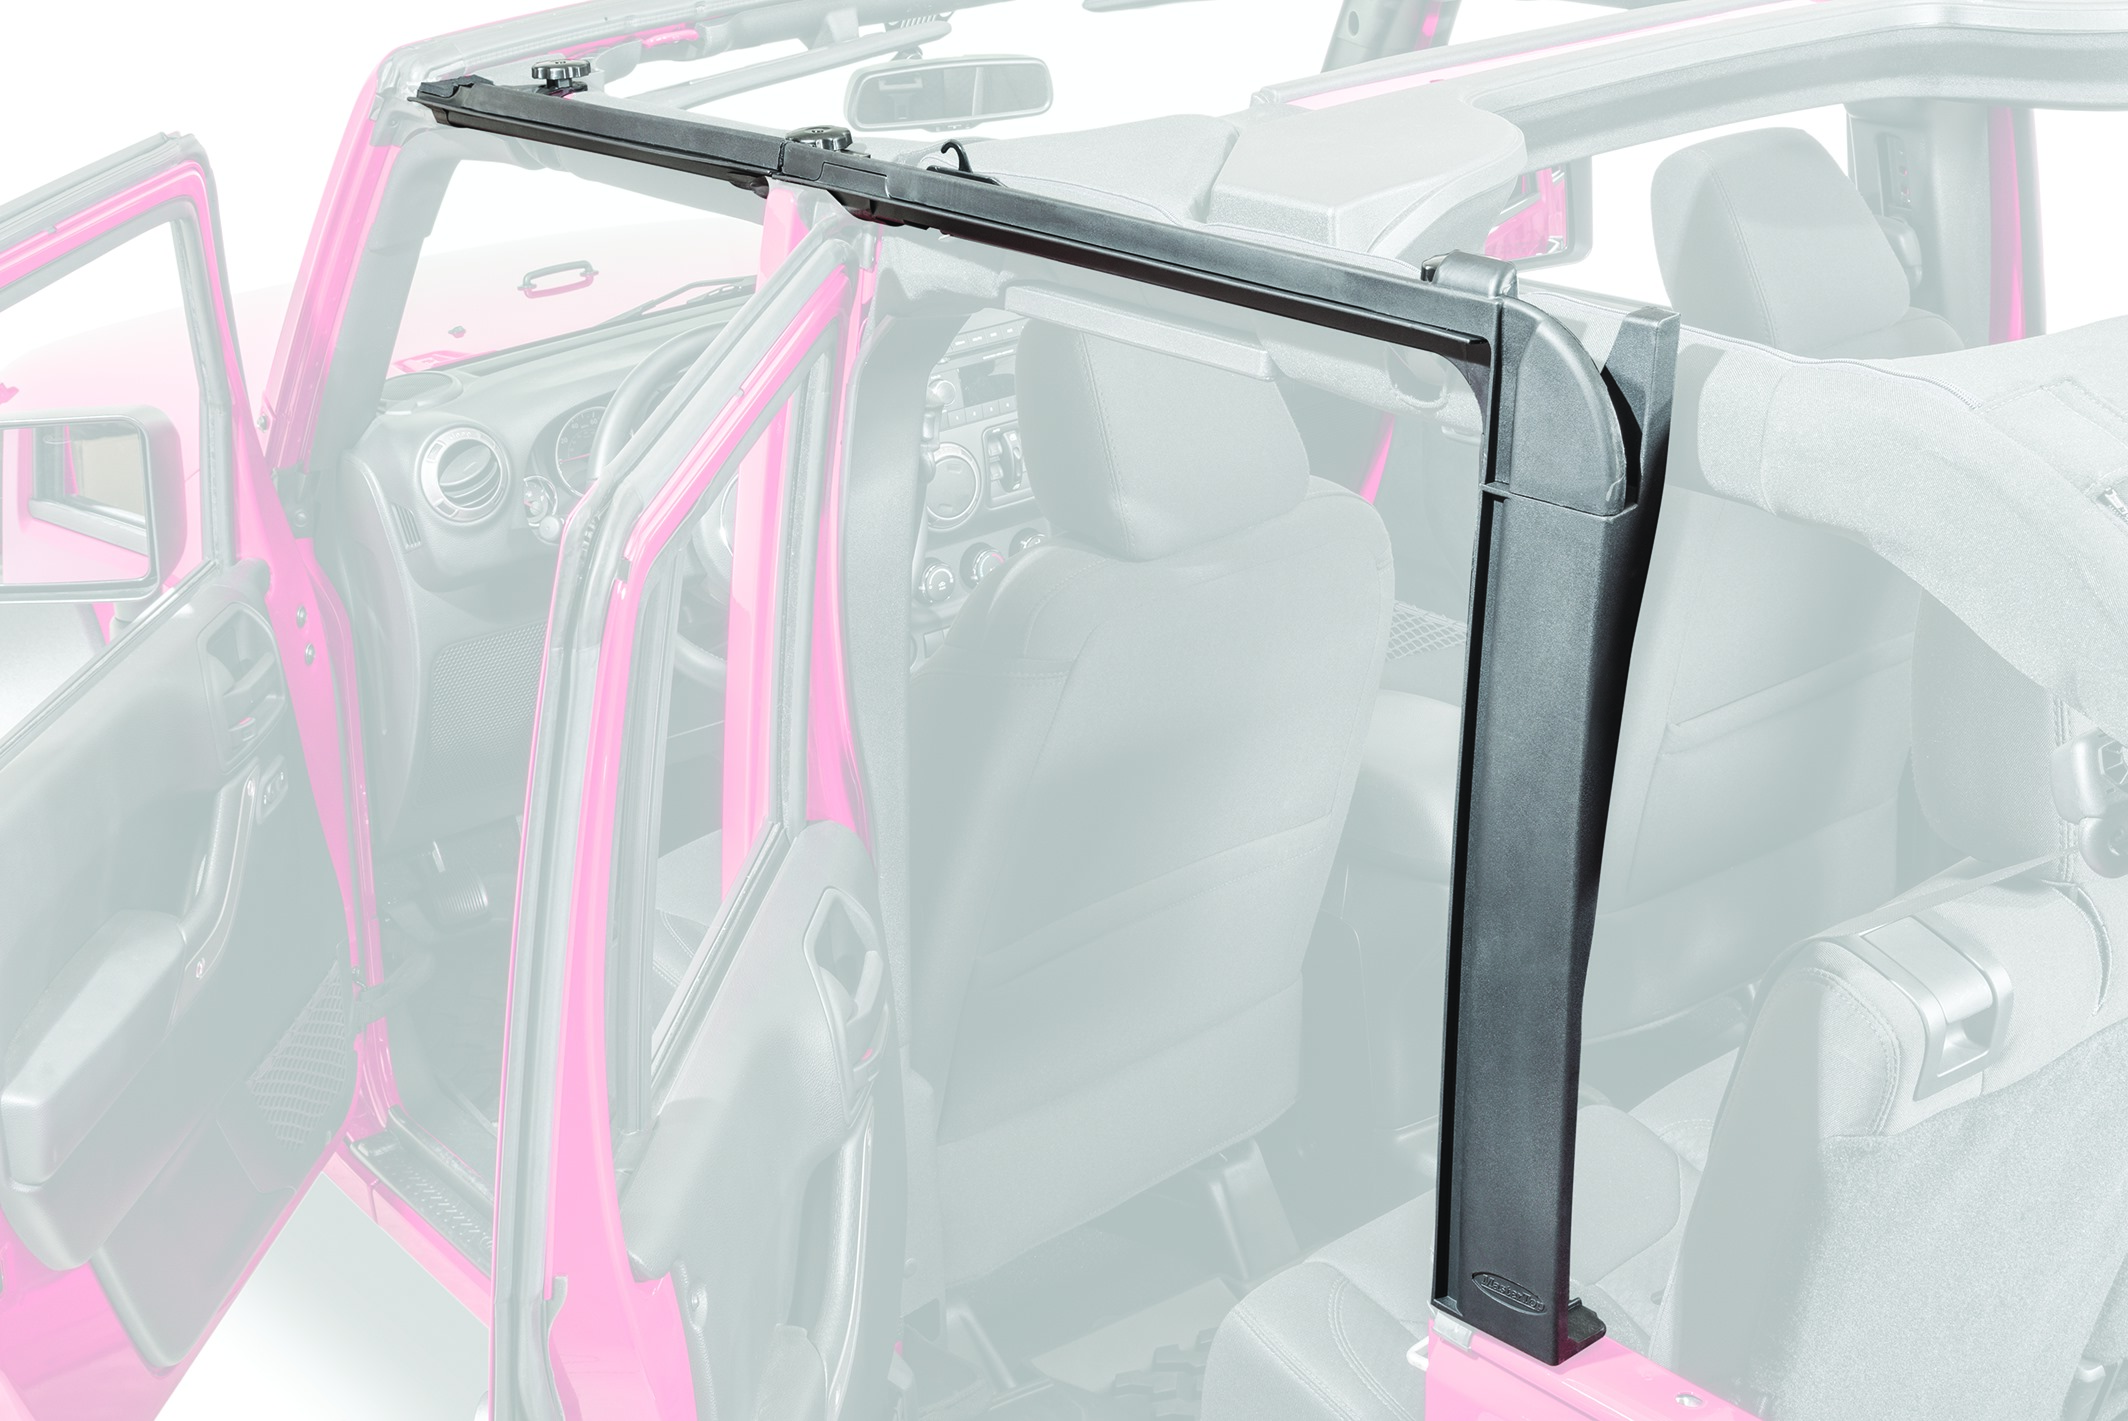 Jeep TJ Factory Style Door Surrounds with Tailgate Bar For 97-06 Wrangler TJ  MasterTop | Krawl Off Road